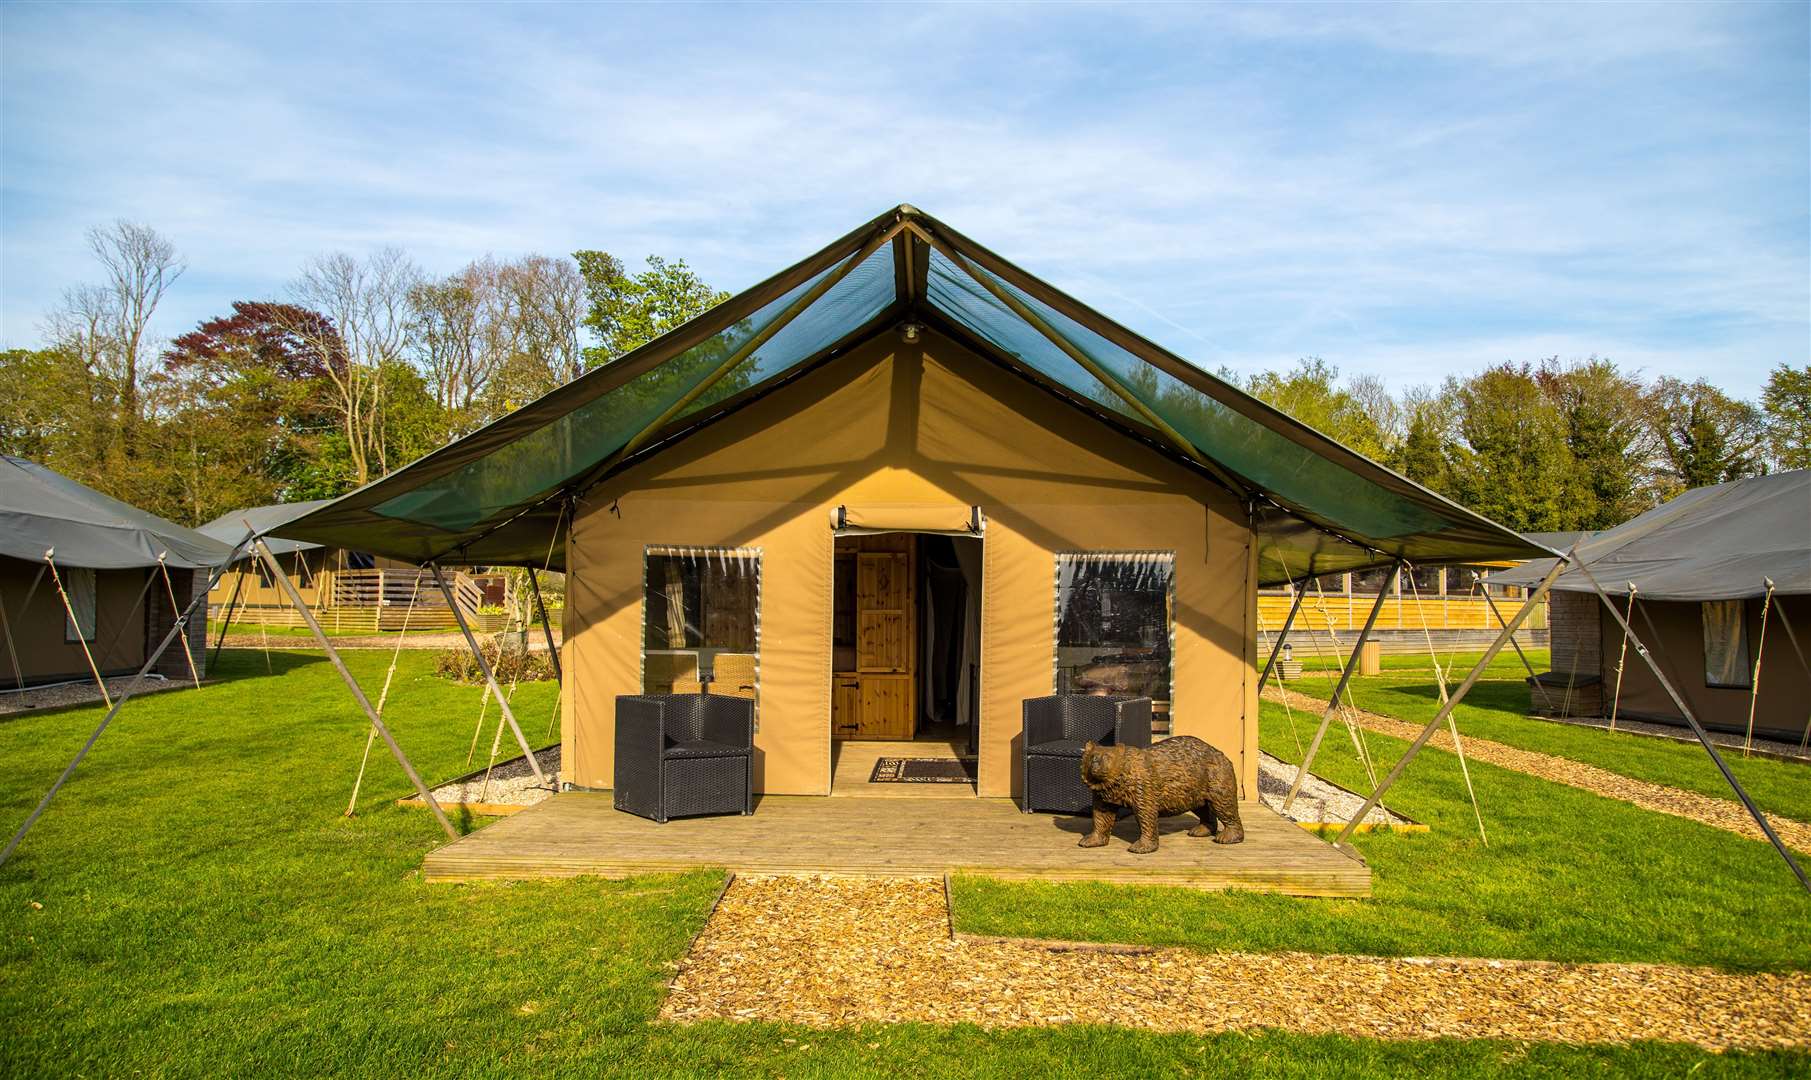 The Bear Lodge glamping tents offer incredible views across the bear enclosure and reserve. Picture: Aspinall Foundation